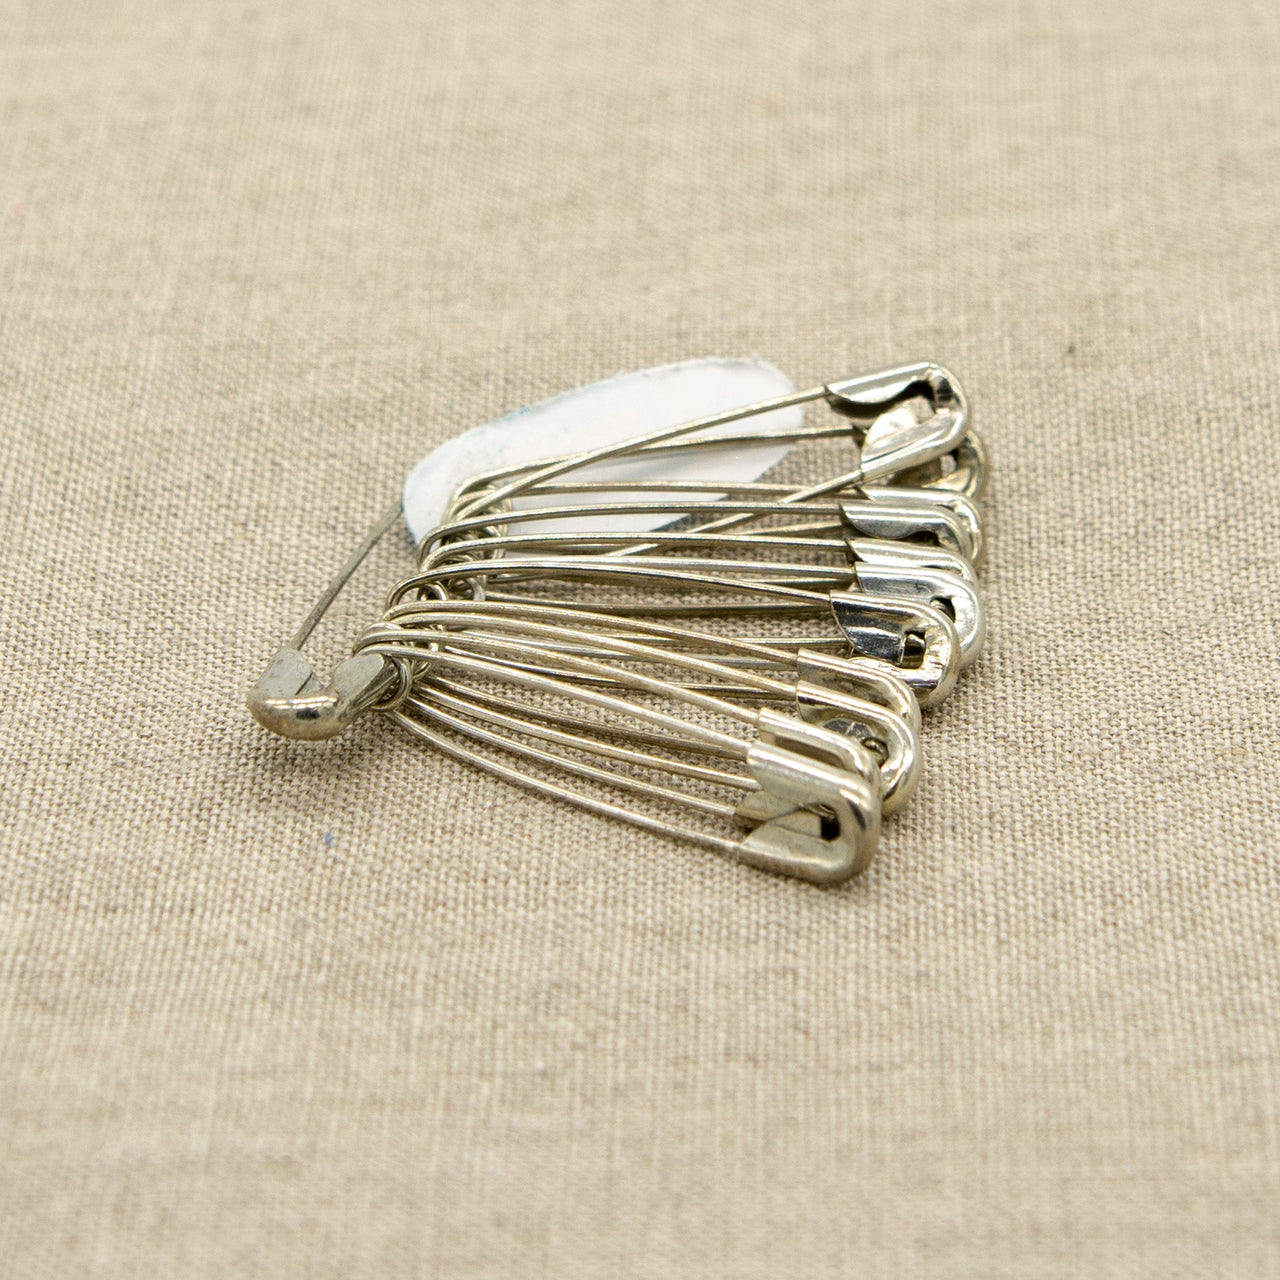 Chrome Safety Pins